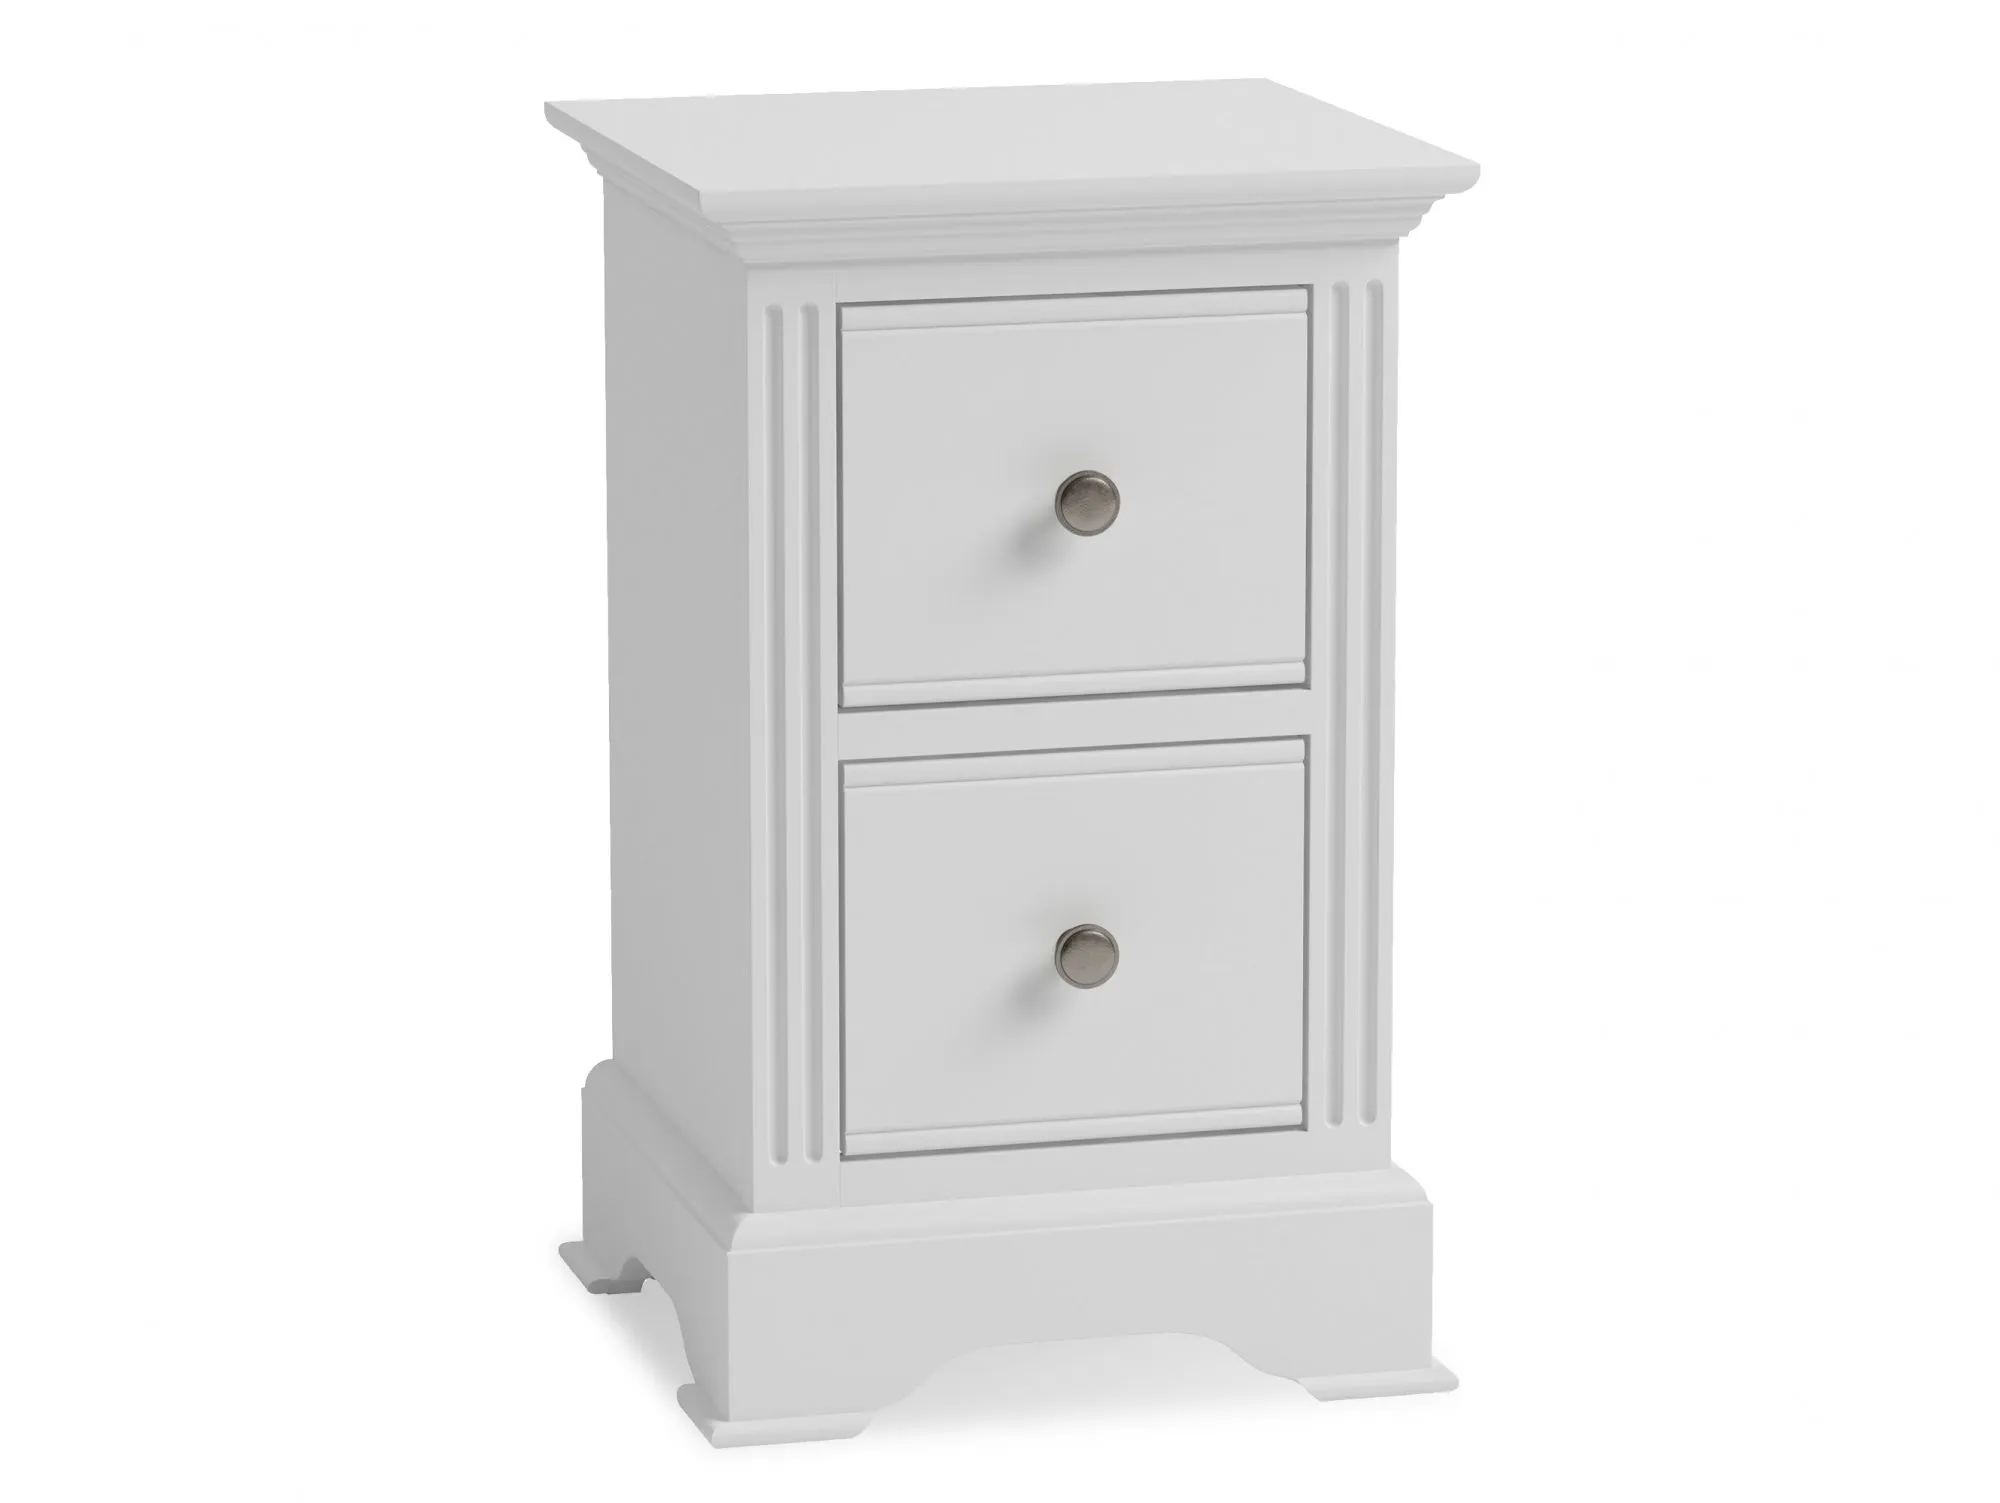 Kenmore Kenmore Catlyn White 2 Drawer Small Bedside Table (Assembled)